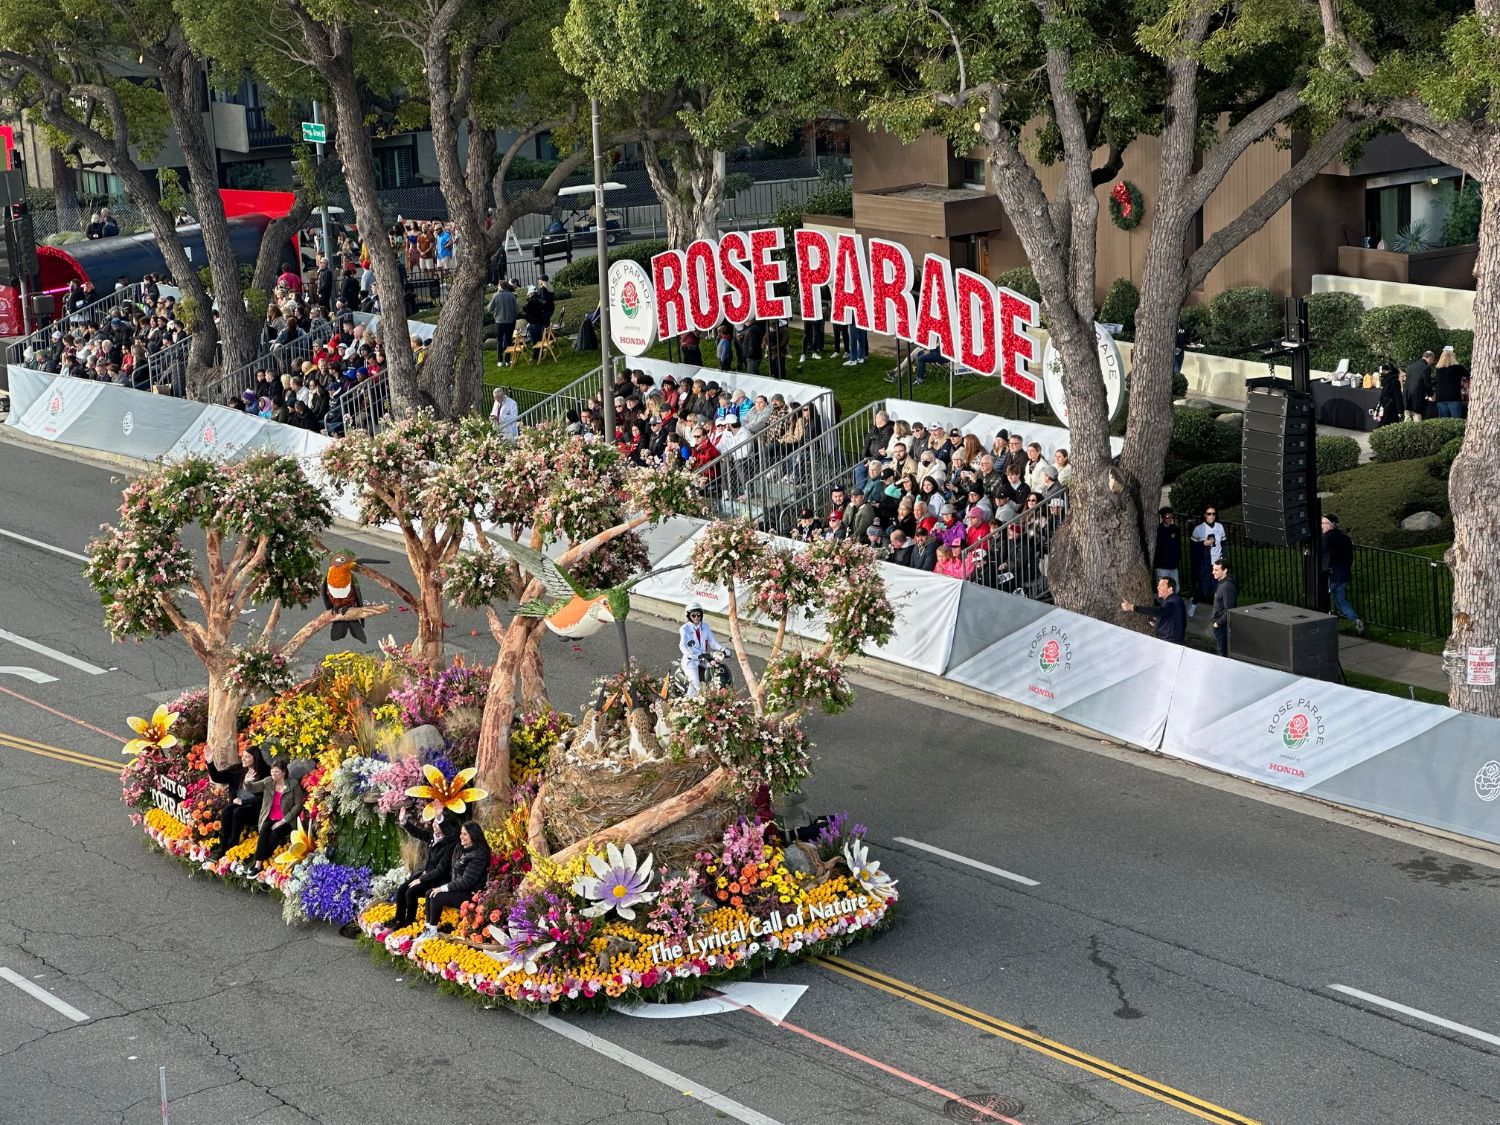 PHOTO: Bill Glazier | The South Pasadenan | The Princess Award for most outstanding floral presentation among entries 35 feet and under in length went to the City of Torrance. The entry was given the name: “The Lyrical Call of Nature.”